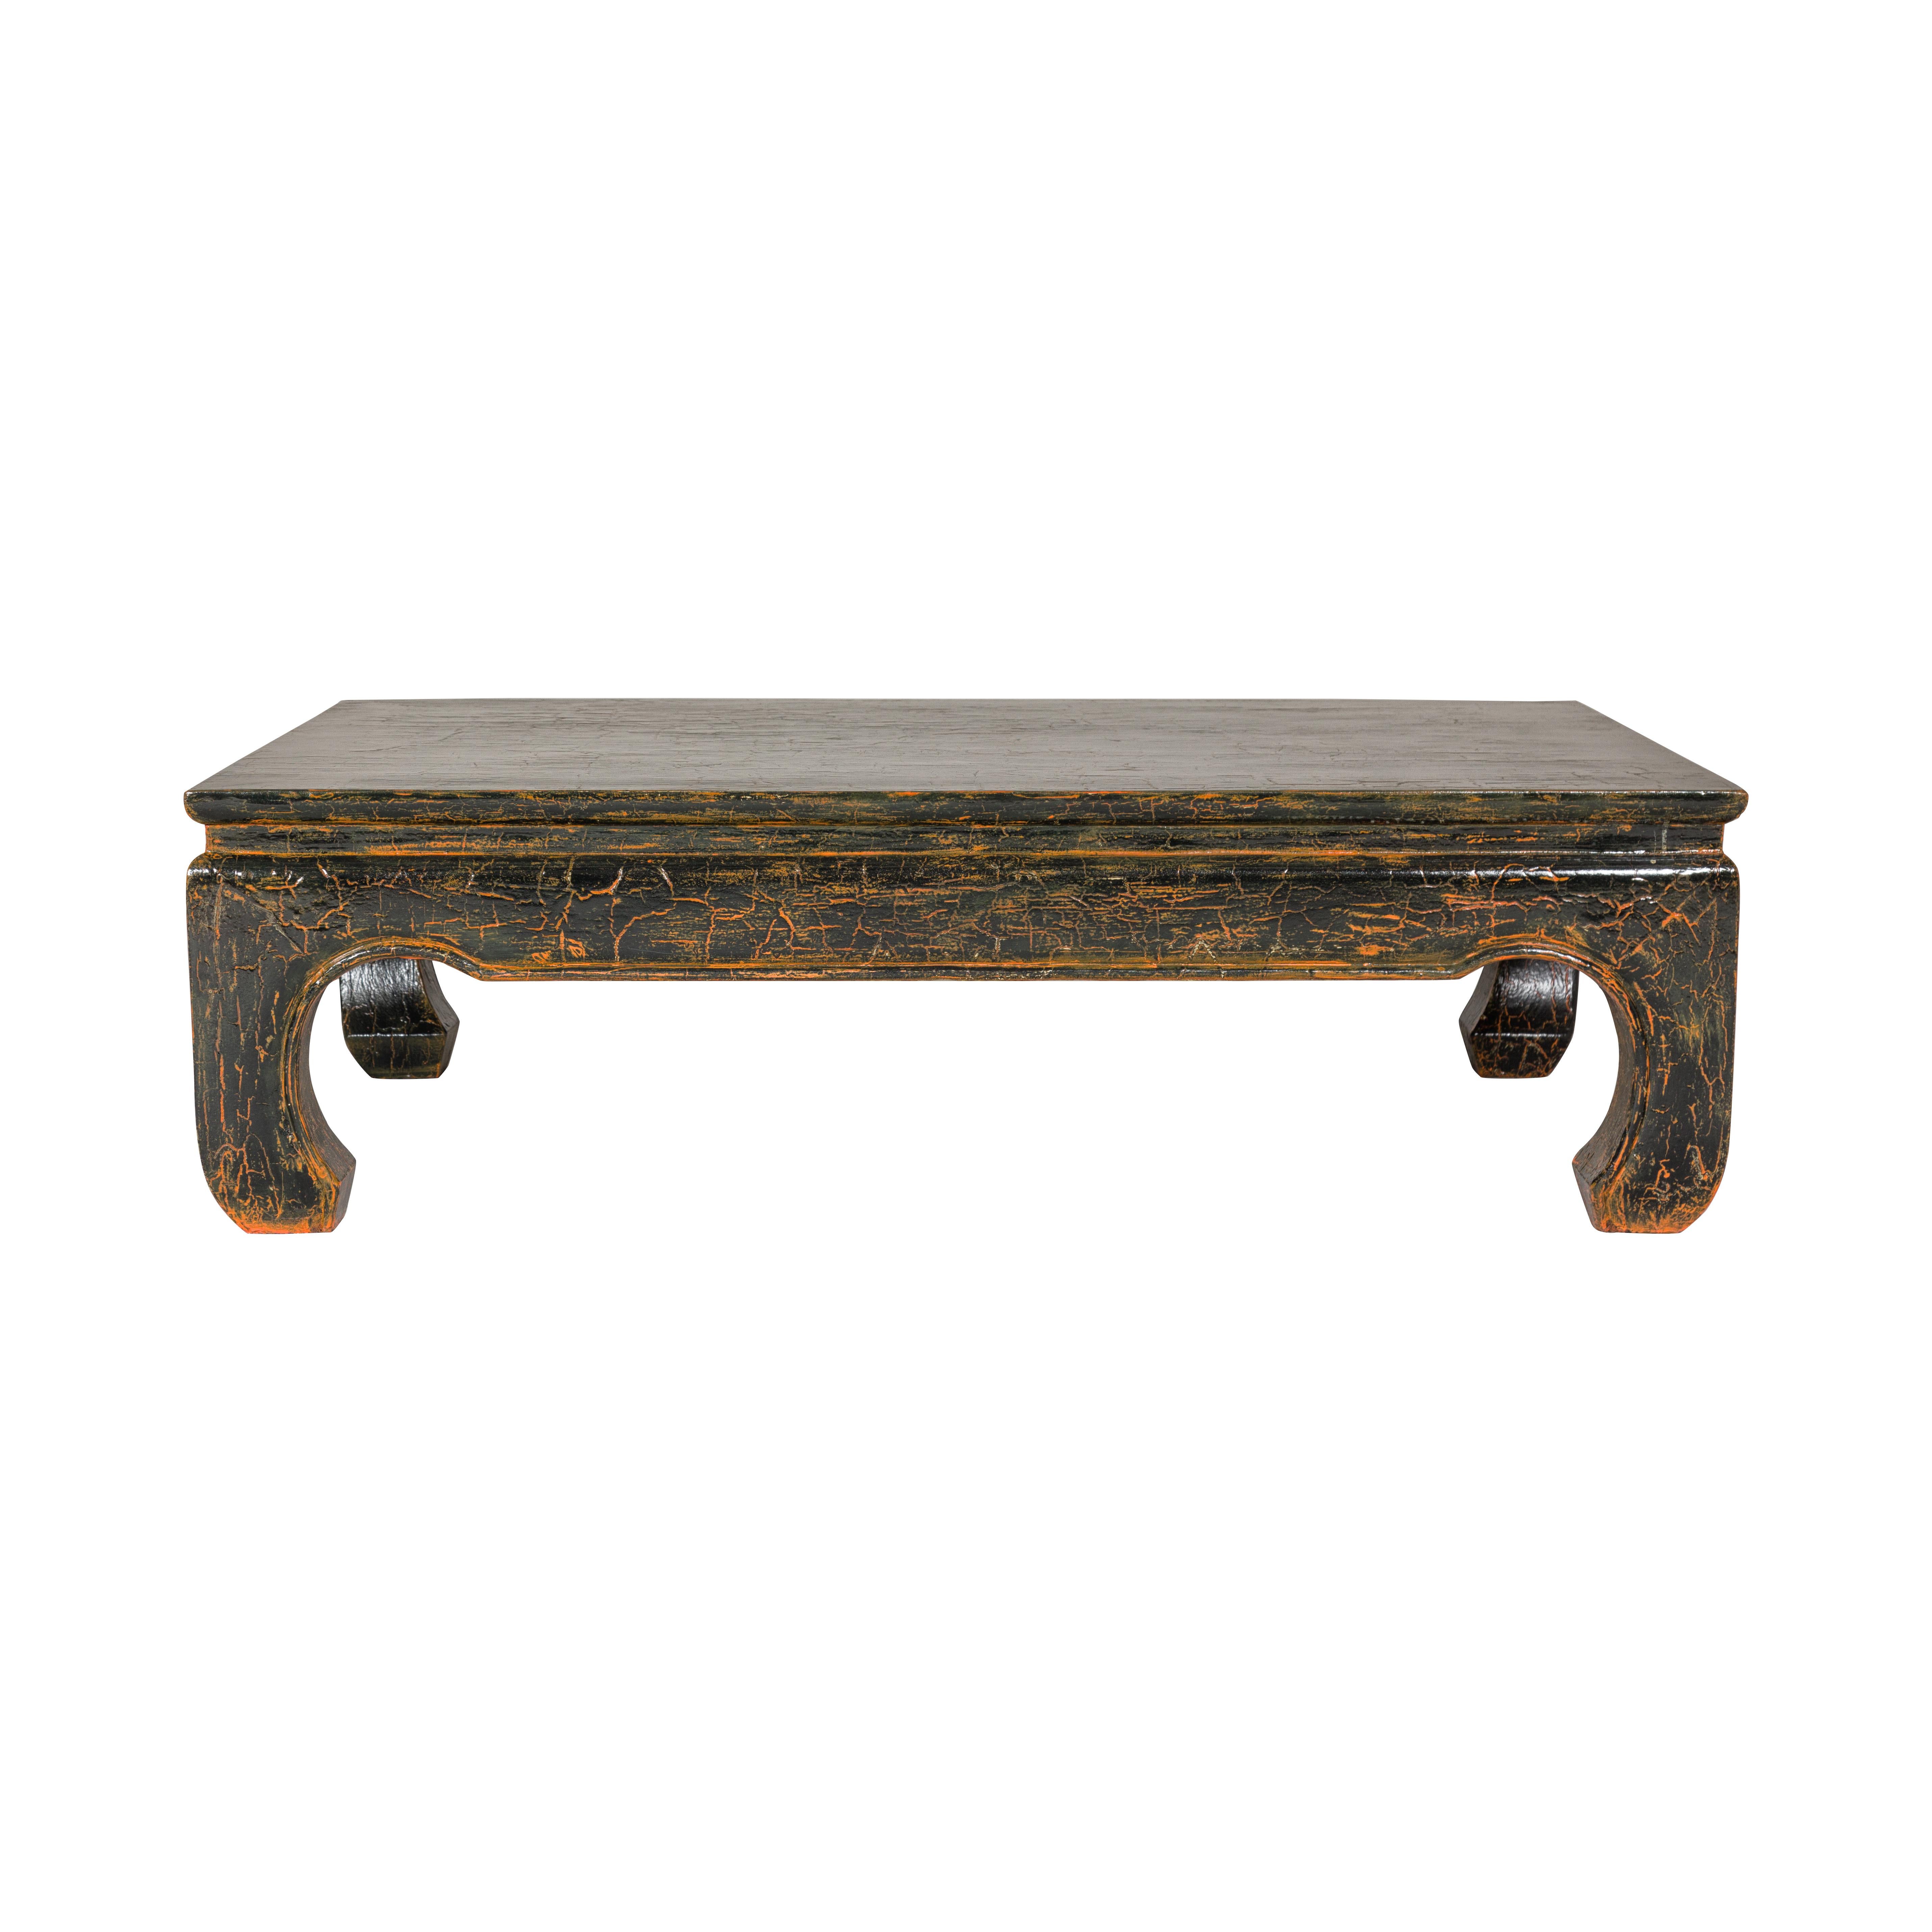 Vintage Chow Legs Distressed Black Coffee Table with Crackle Orange Finish For Sale 12